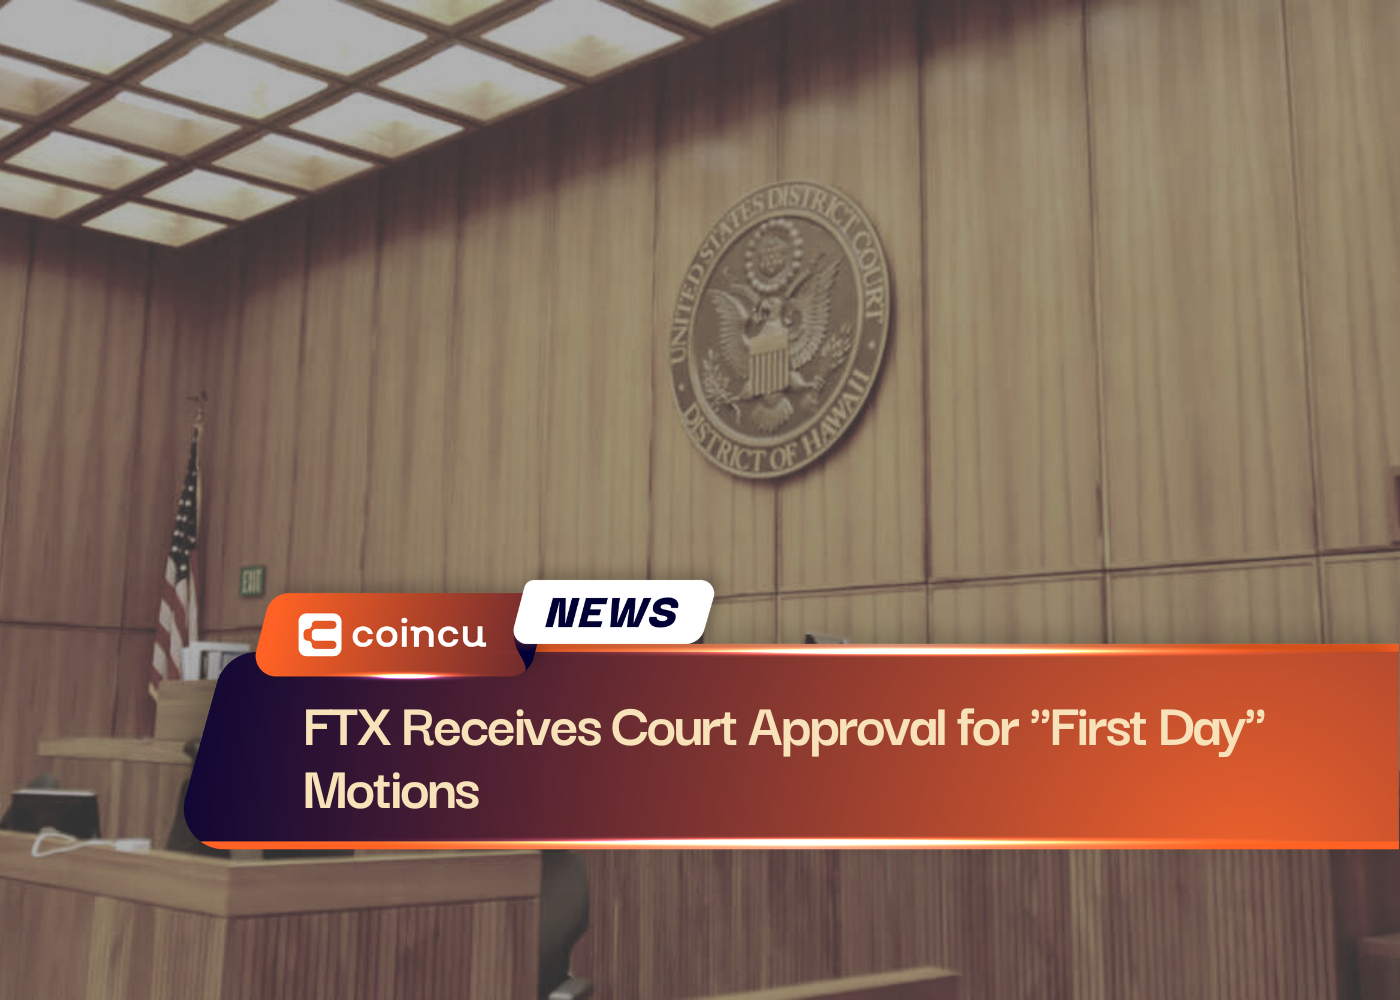 FTX Receives Court Approval for "First Day" Motions